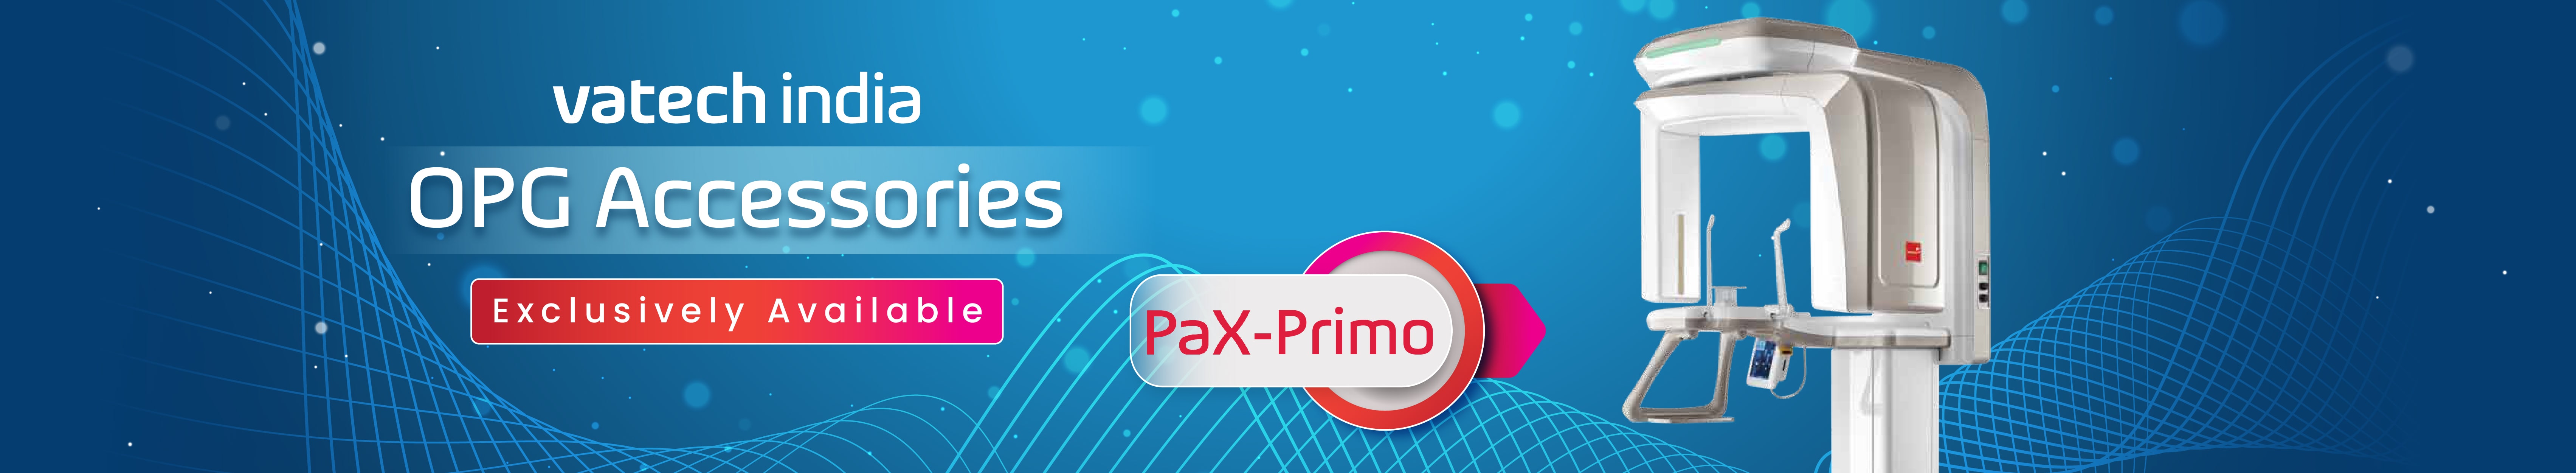 PaX-Primo(OPG)